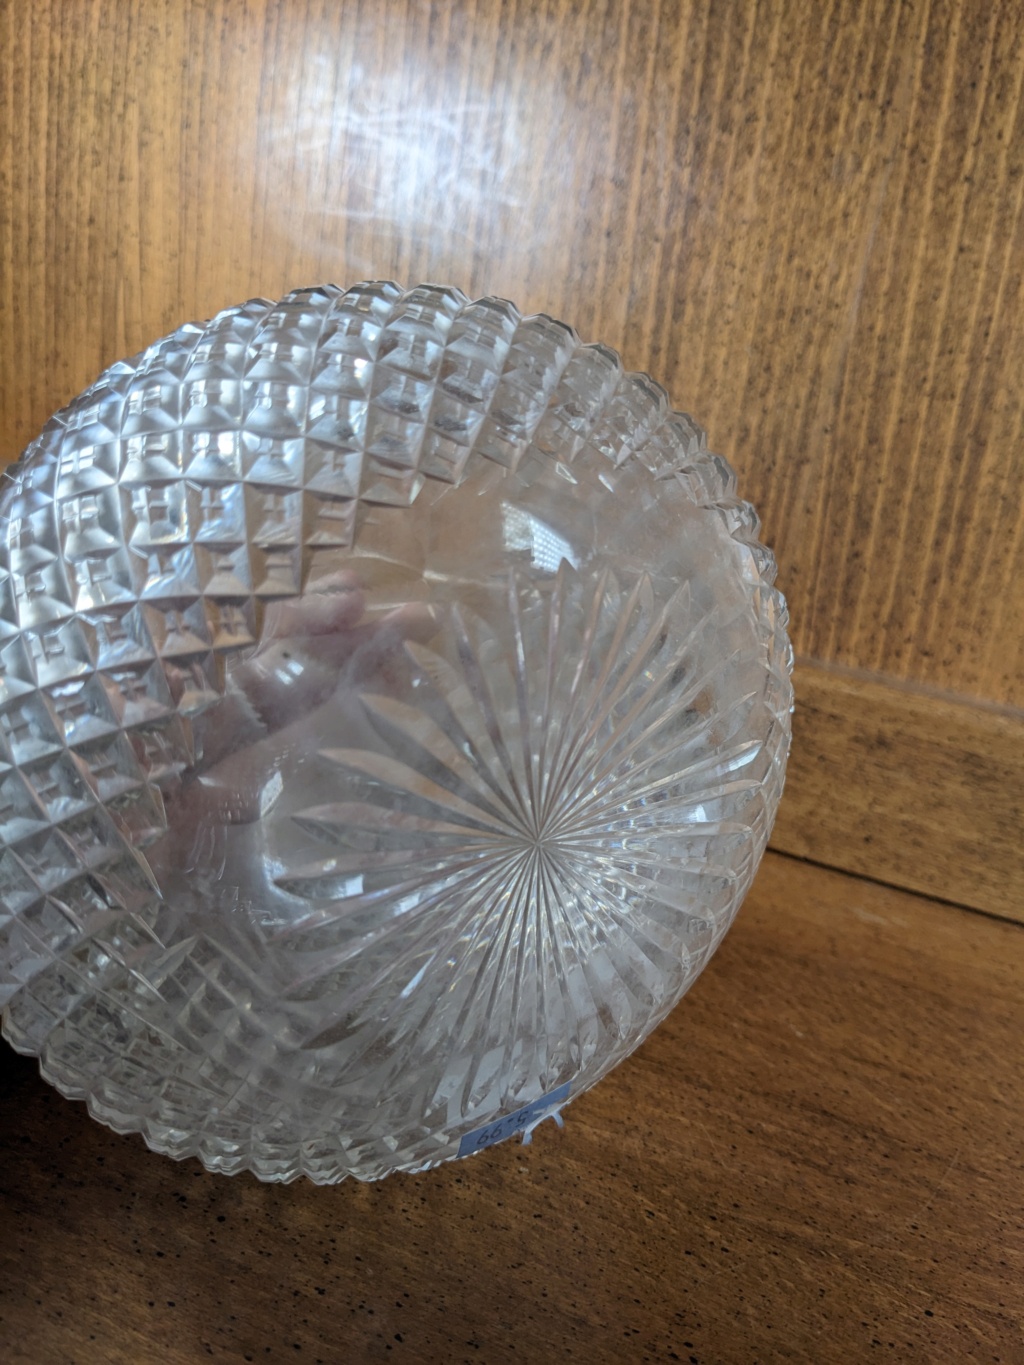 Is this a Baccarat decanter? Pxl_2019